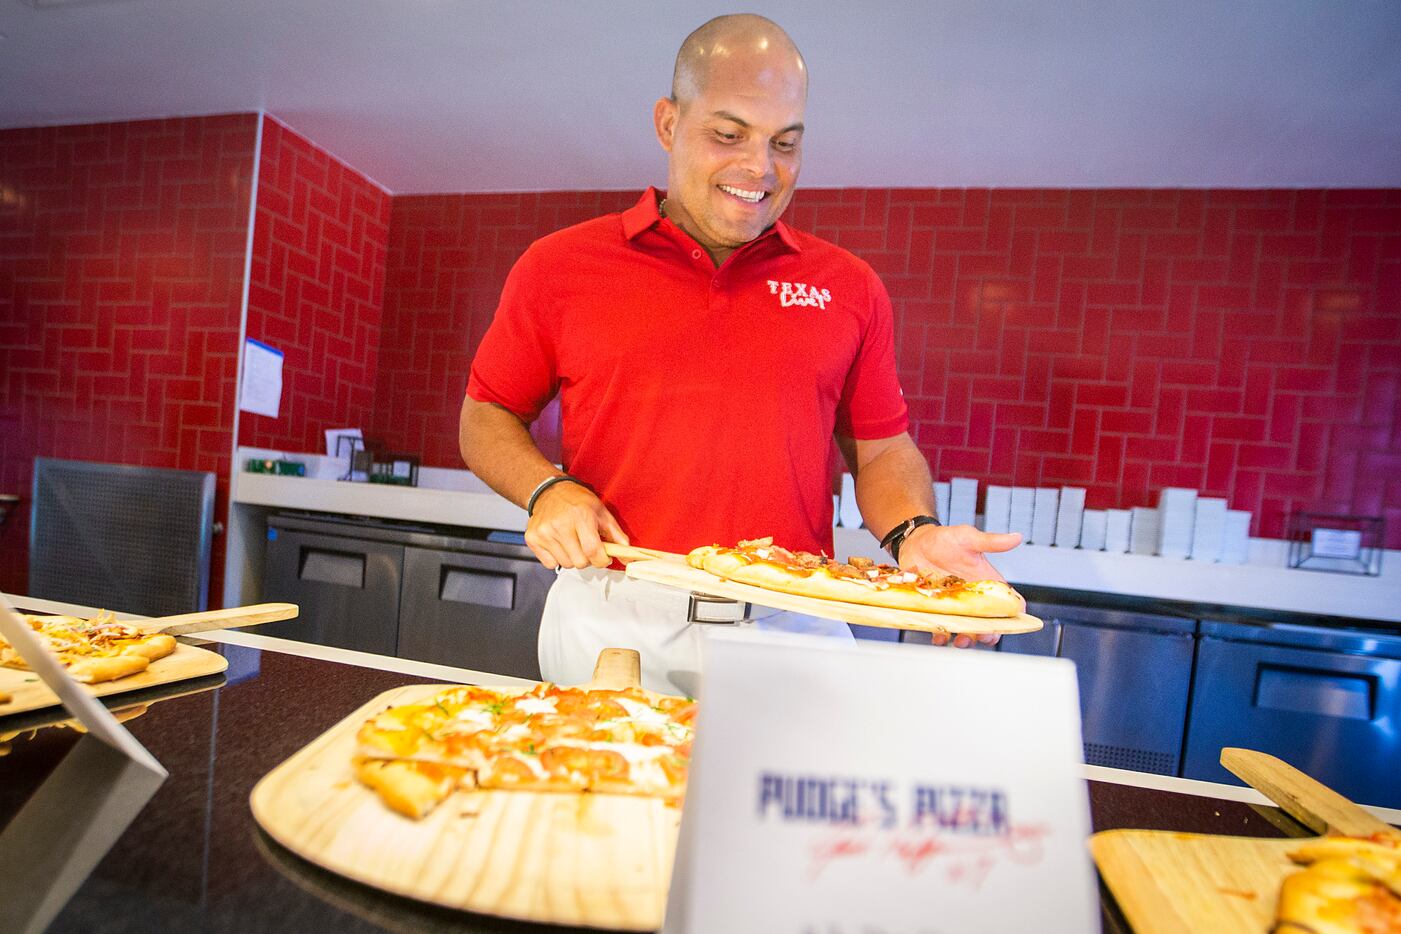 Hall of Fame Texas Rangers catcher Ivan "Pudge" Rodri­guez showed off samples of pizza that...